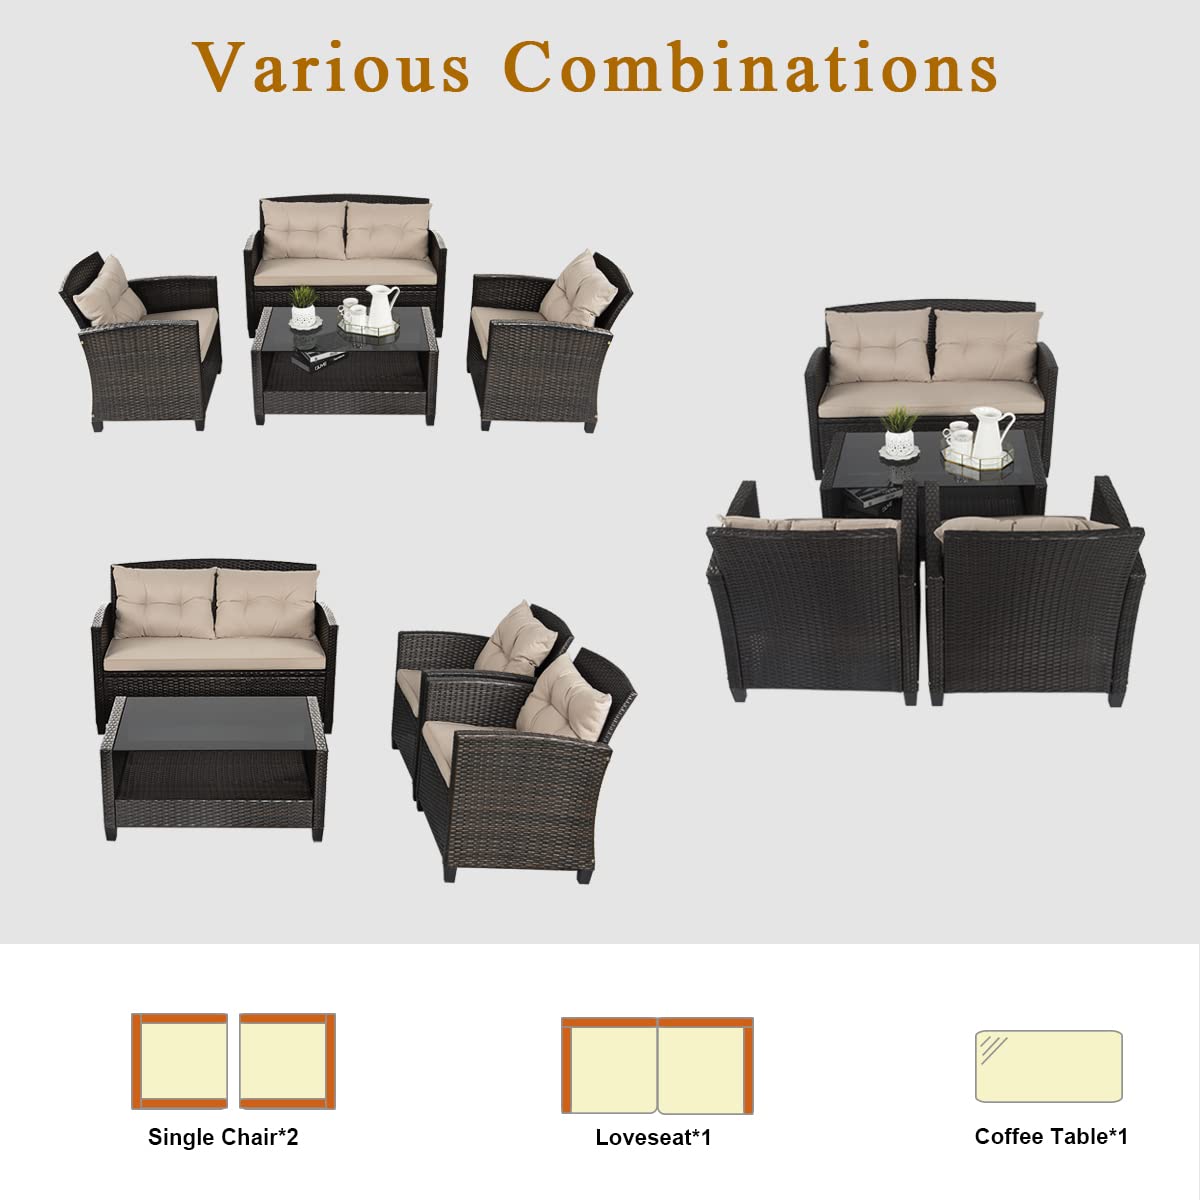 4 Pcs Outdoor Furniture Set, Patio Rattan Wicker Conversation Set, Tempered Glass Tabletop & Sponge Cushions, Mixed Brown & Beige